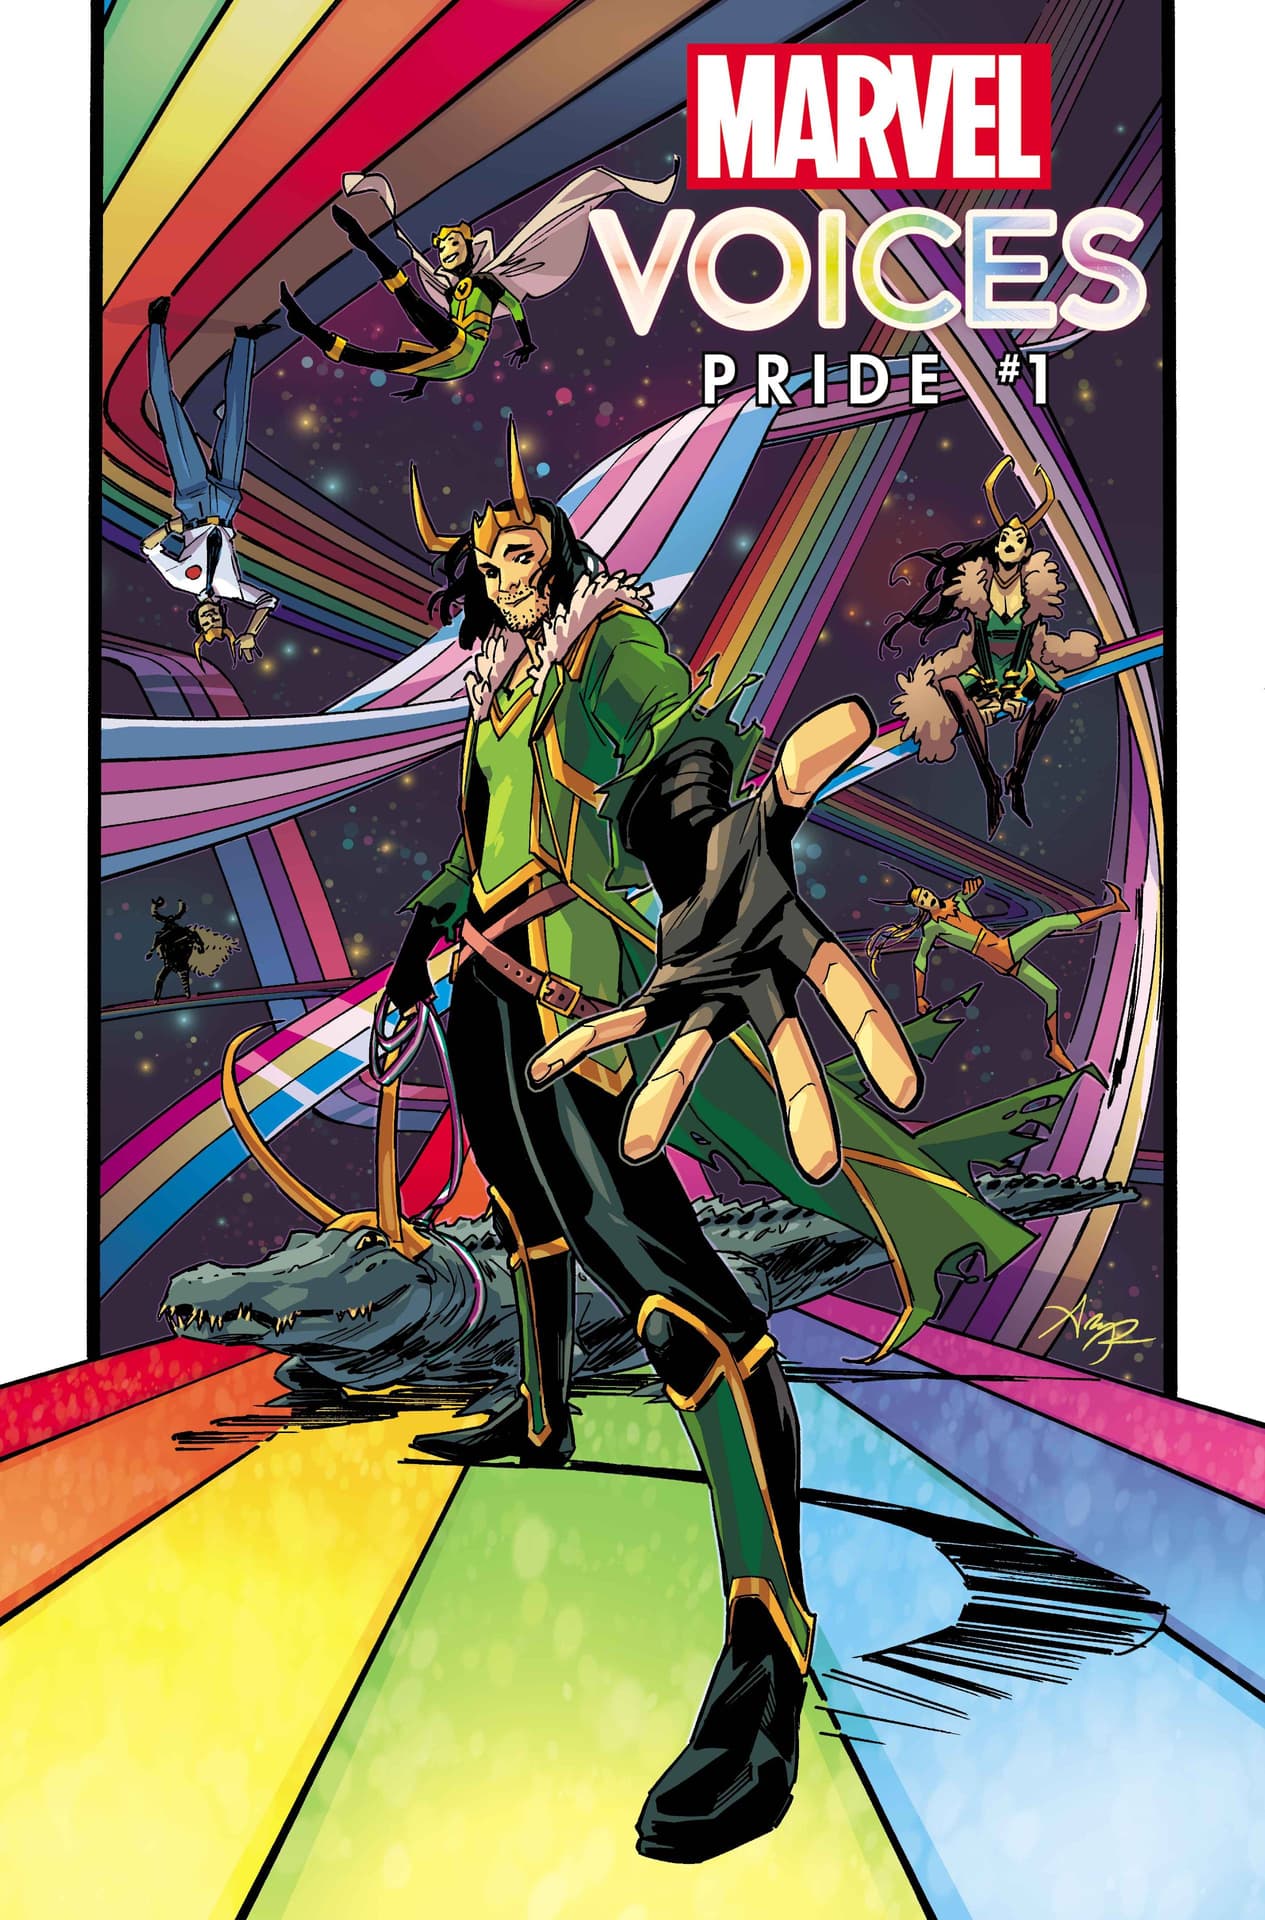 MARVEL’S VOICES: PRIDE variant cover by Amy Reeder